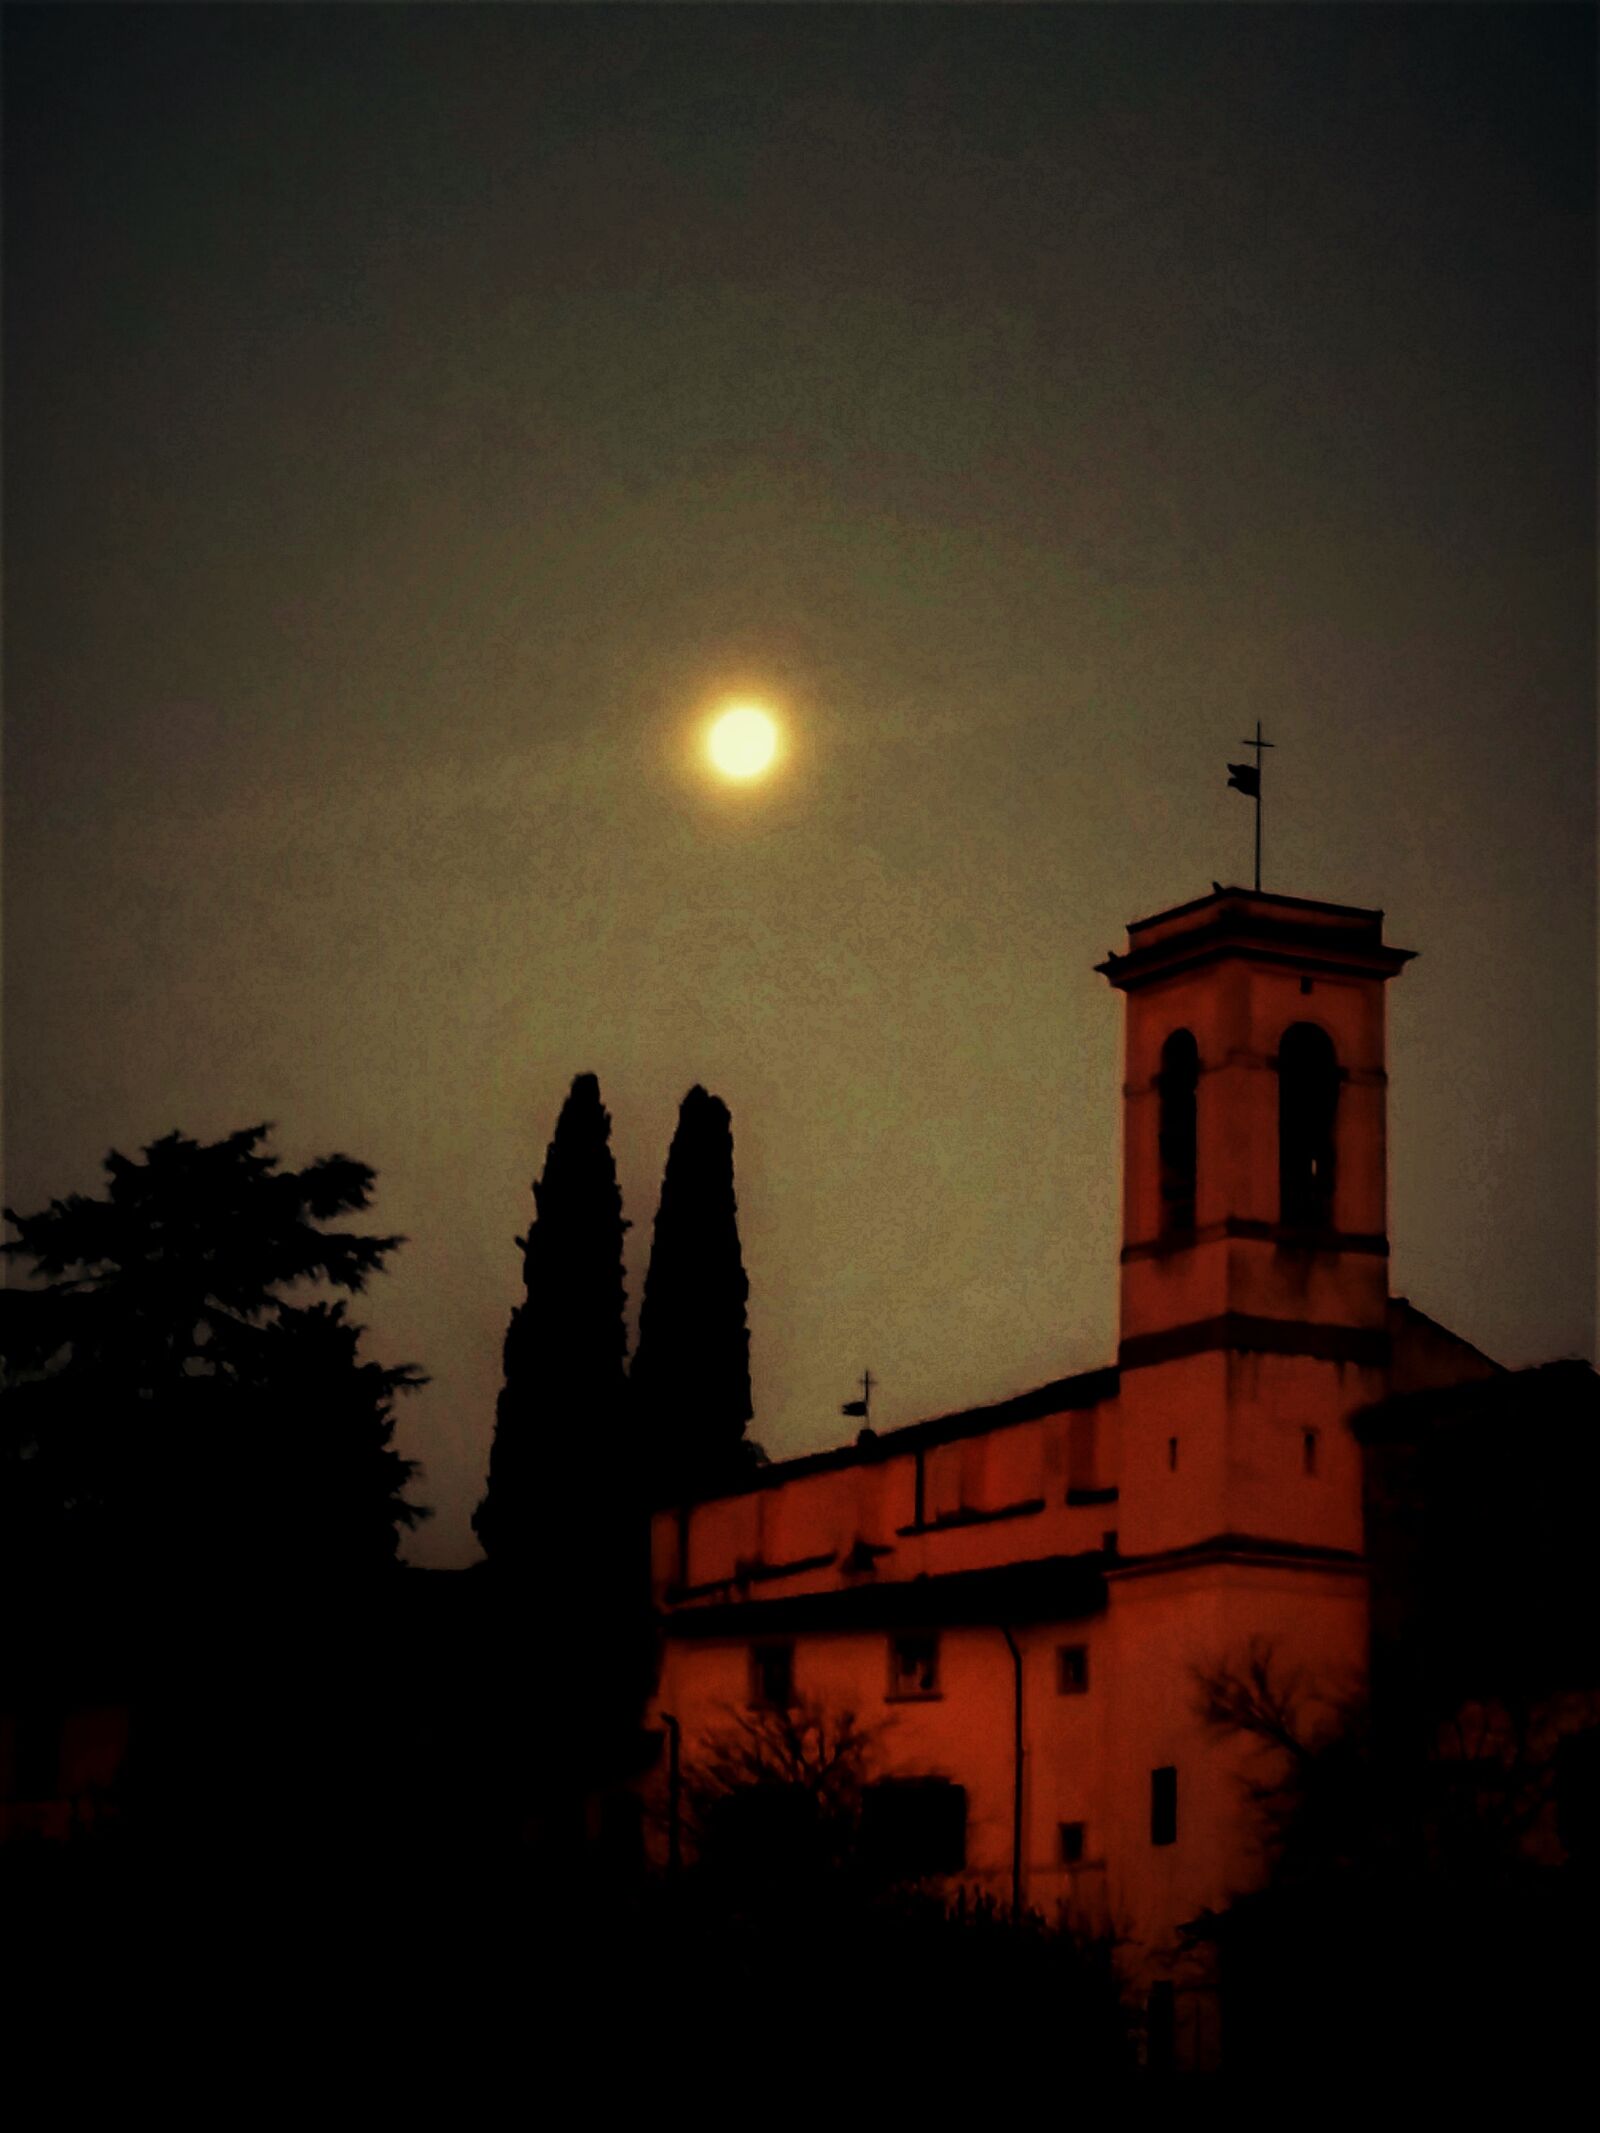 LG G2 sample photo. Notte, chiesa, religione photography